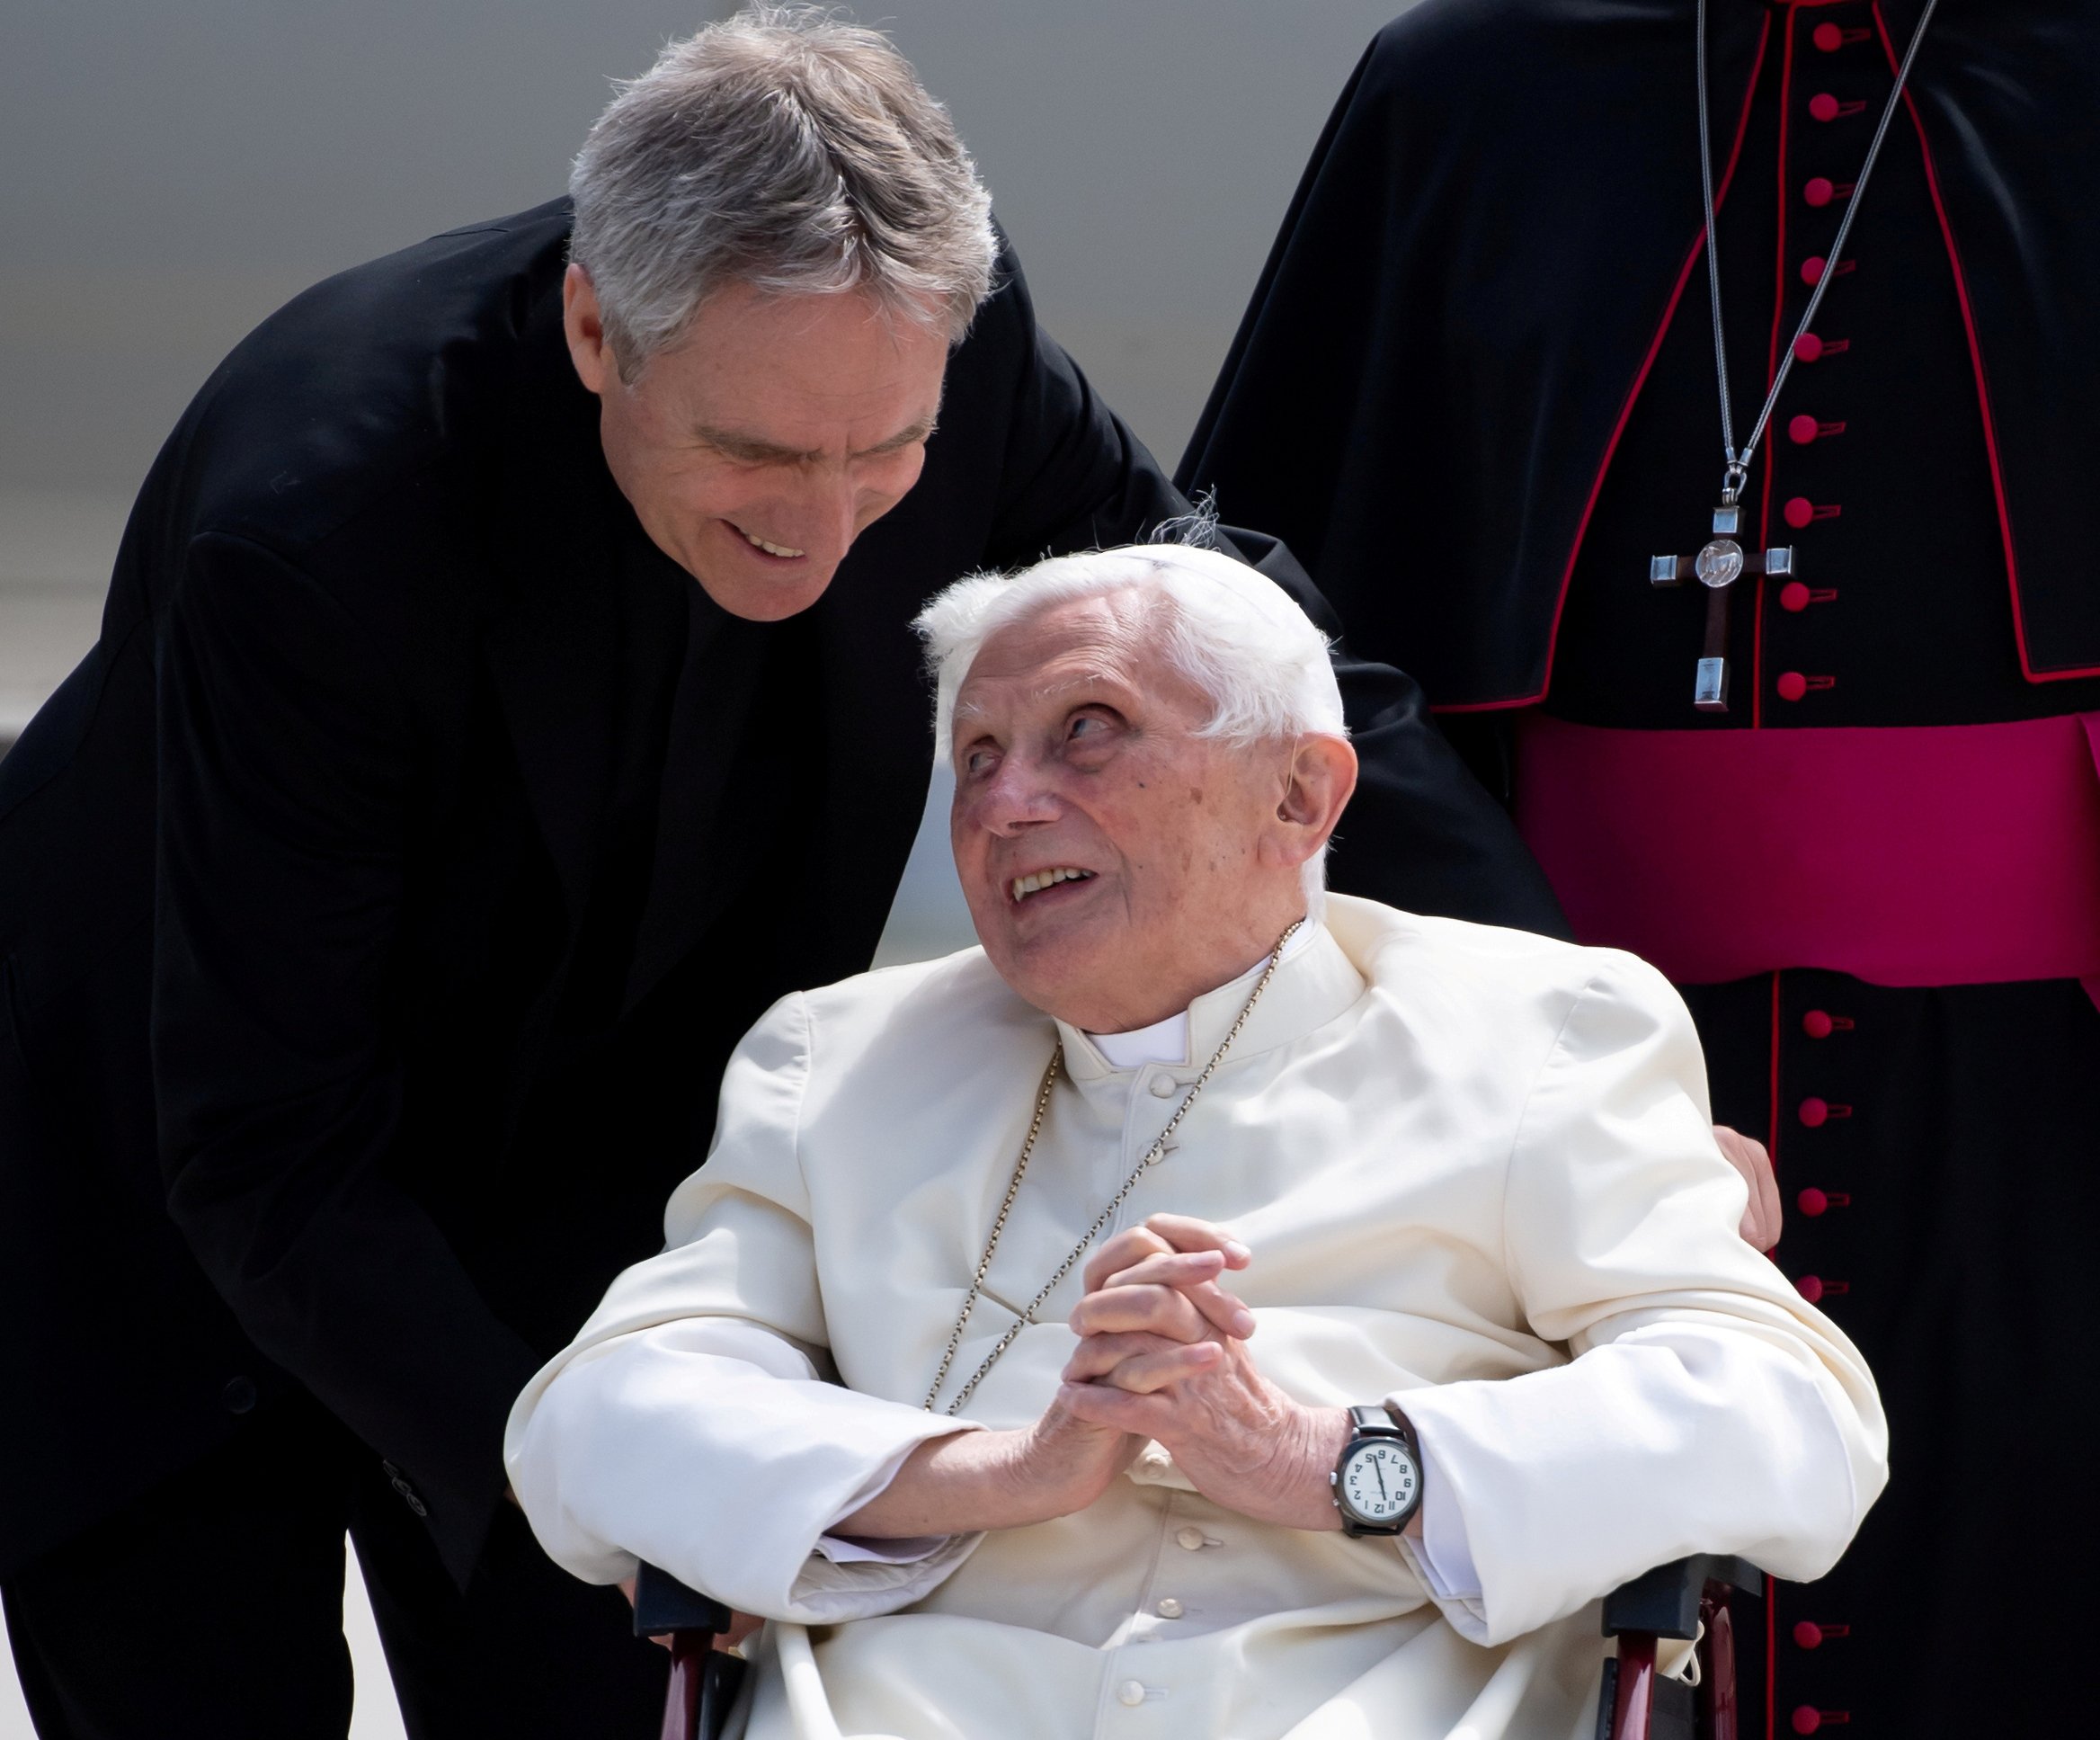 Retired Pope Benedict XVI speaks to his private secretary, Archbishop Georg Gänswein, at Germany's Munich Airport before his departure to Rome June 22, 2020. (CNS photo/Sven Hoppe, pool via Reuters)